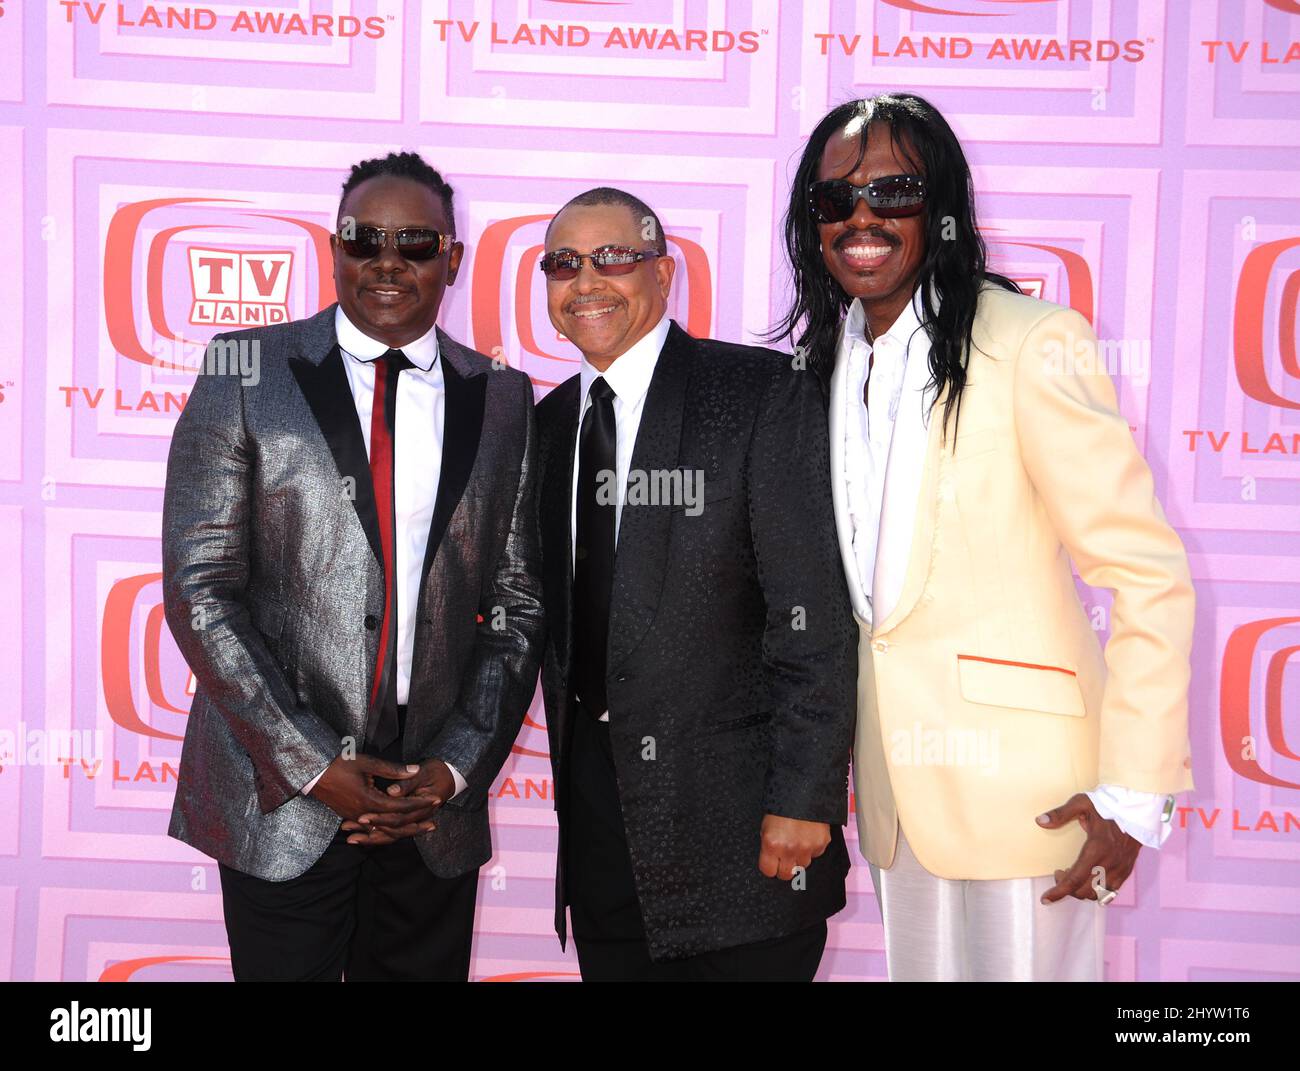 Philip Bailey, Ralph Johnson and Verdine White of Earth, Wind and Fire at the 7th Annual TV Land Awards Held at the Gibson Amphitheatre, Universal City, Ca. Stock Photo